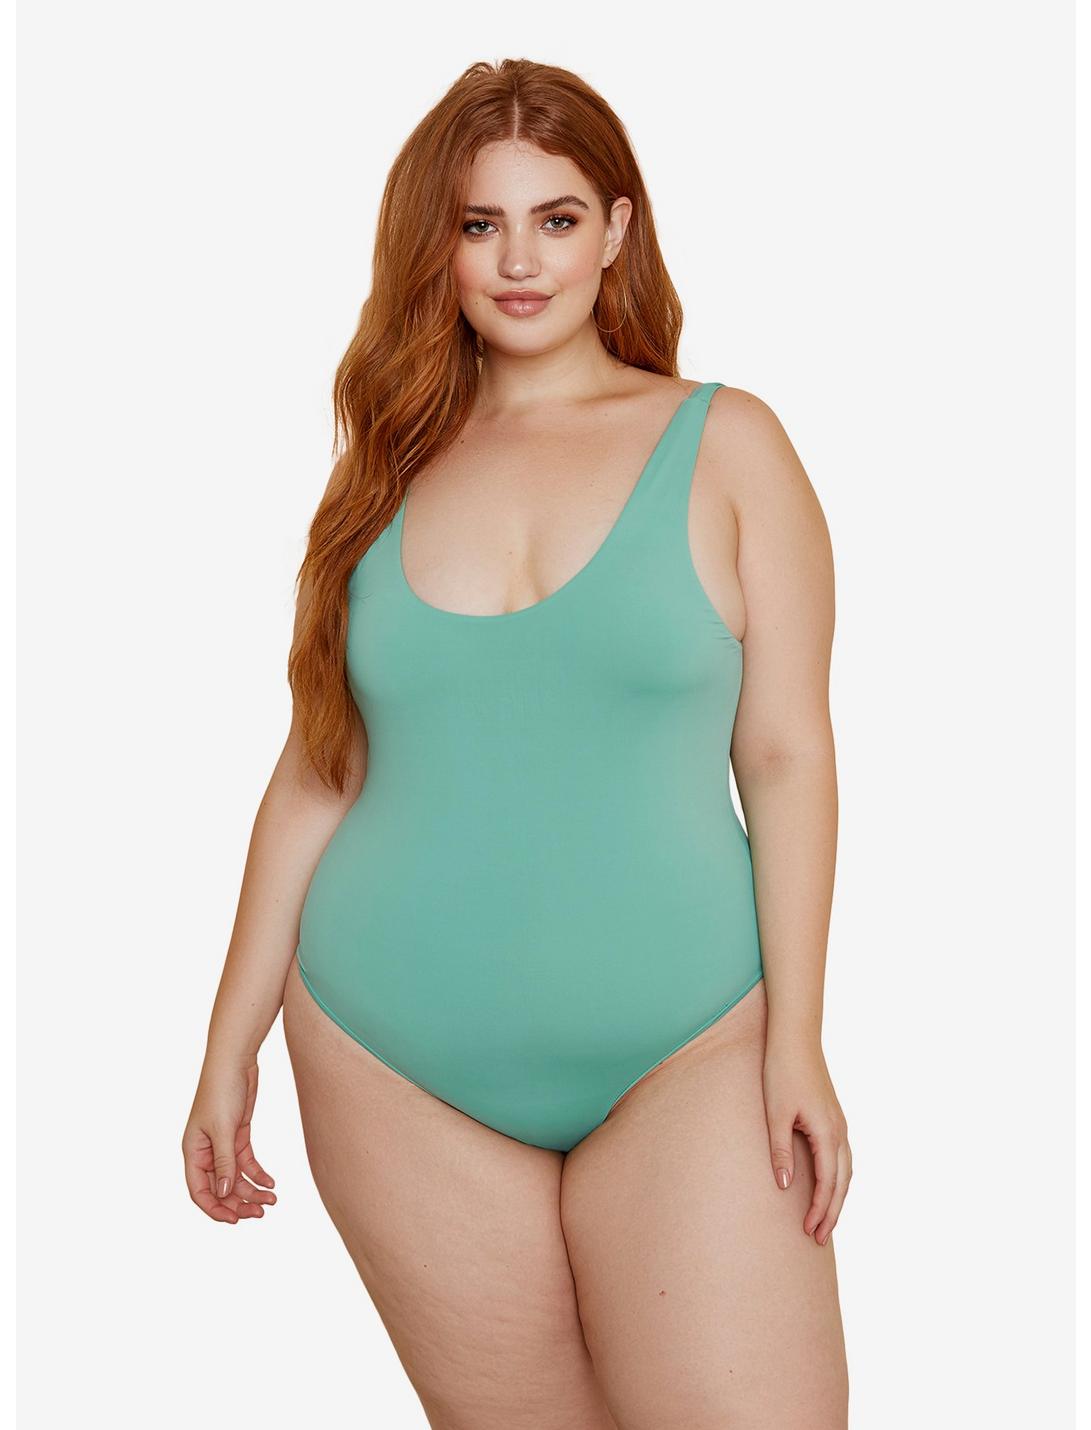 Dippin' Daisy's Serene Swimsuit Palm Plus Size, GREEN, hi-res